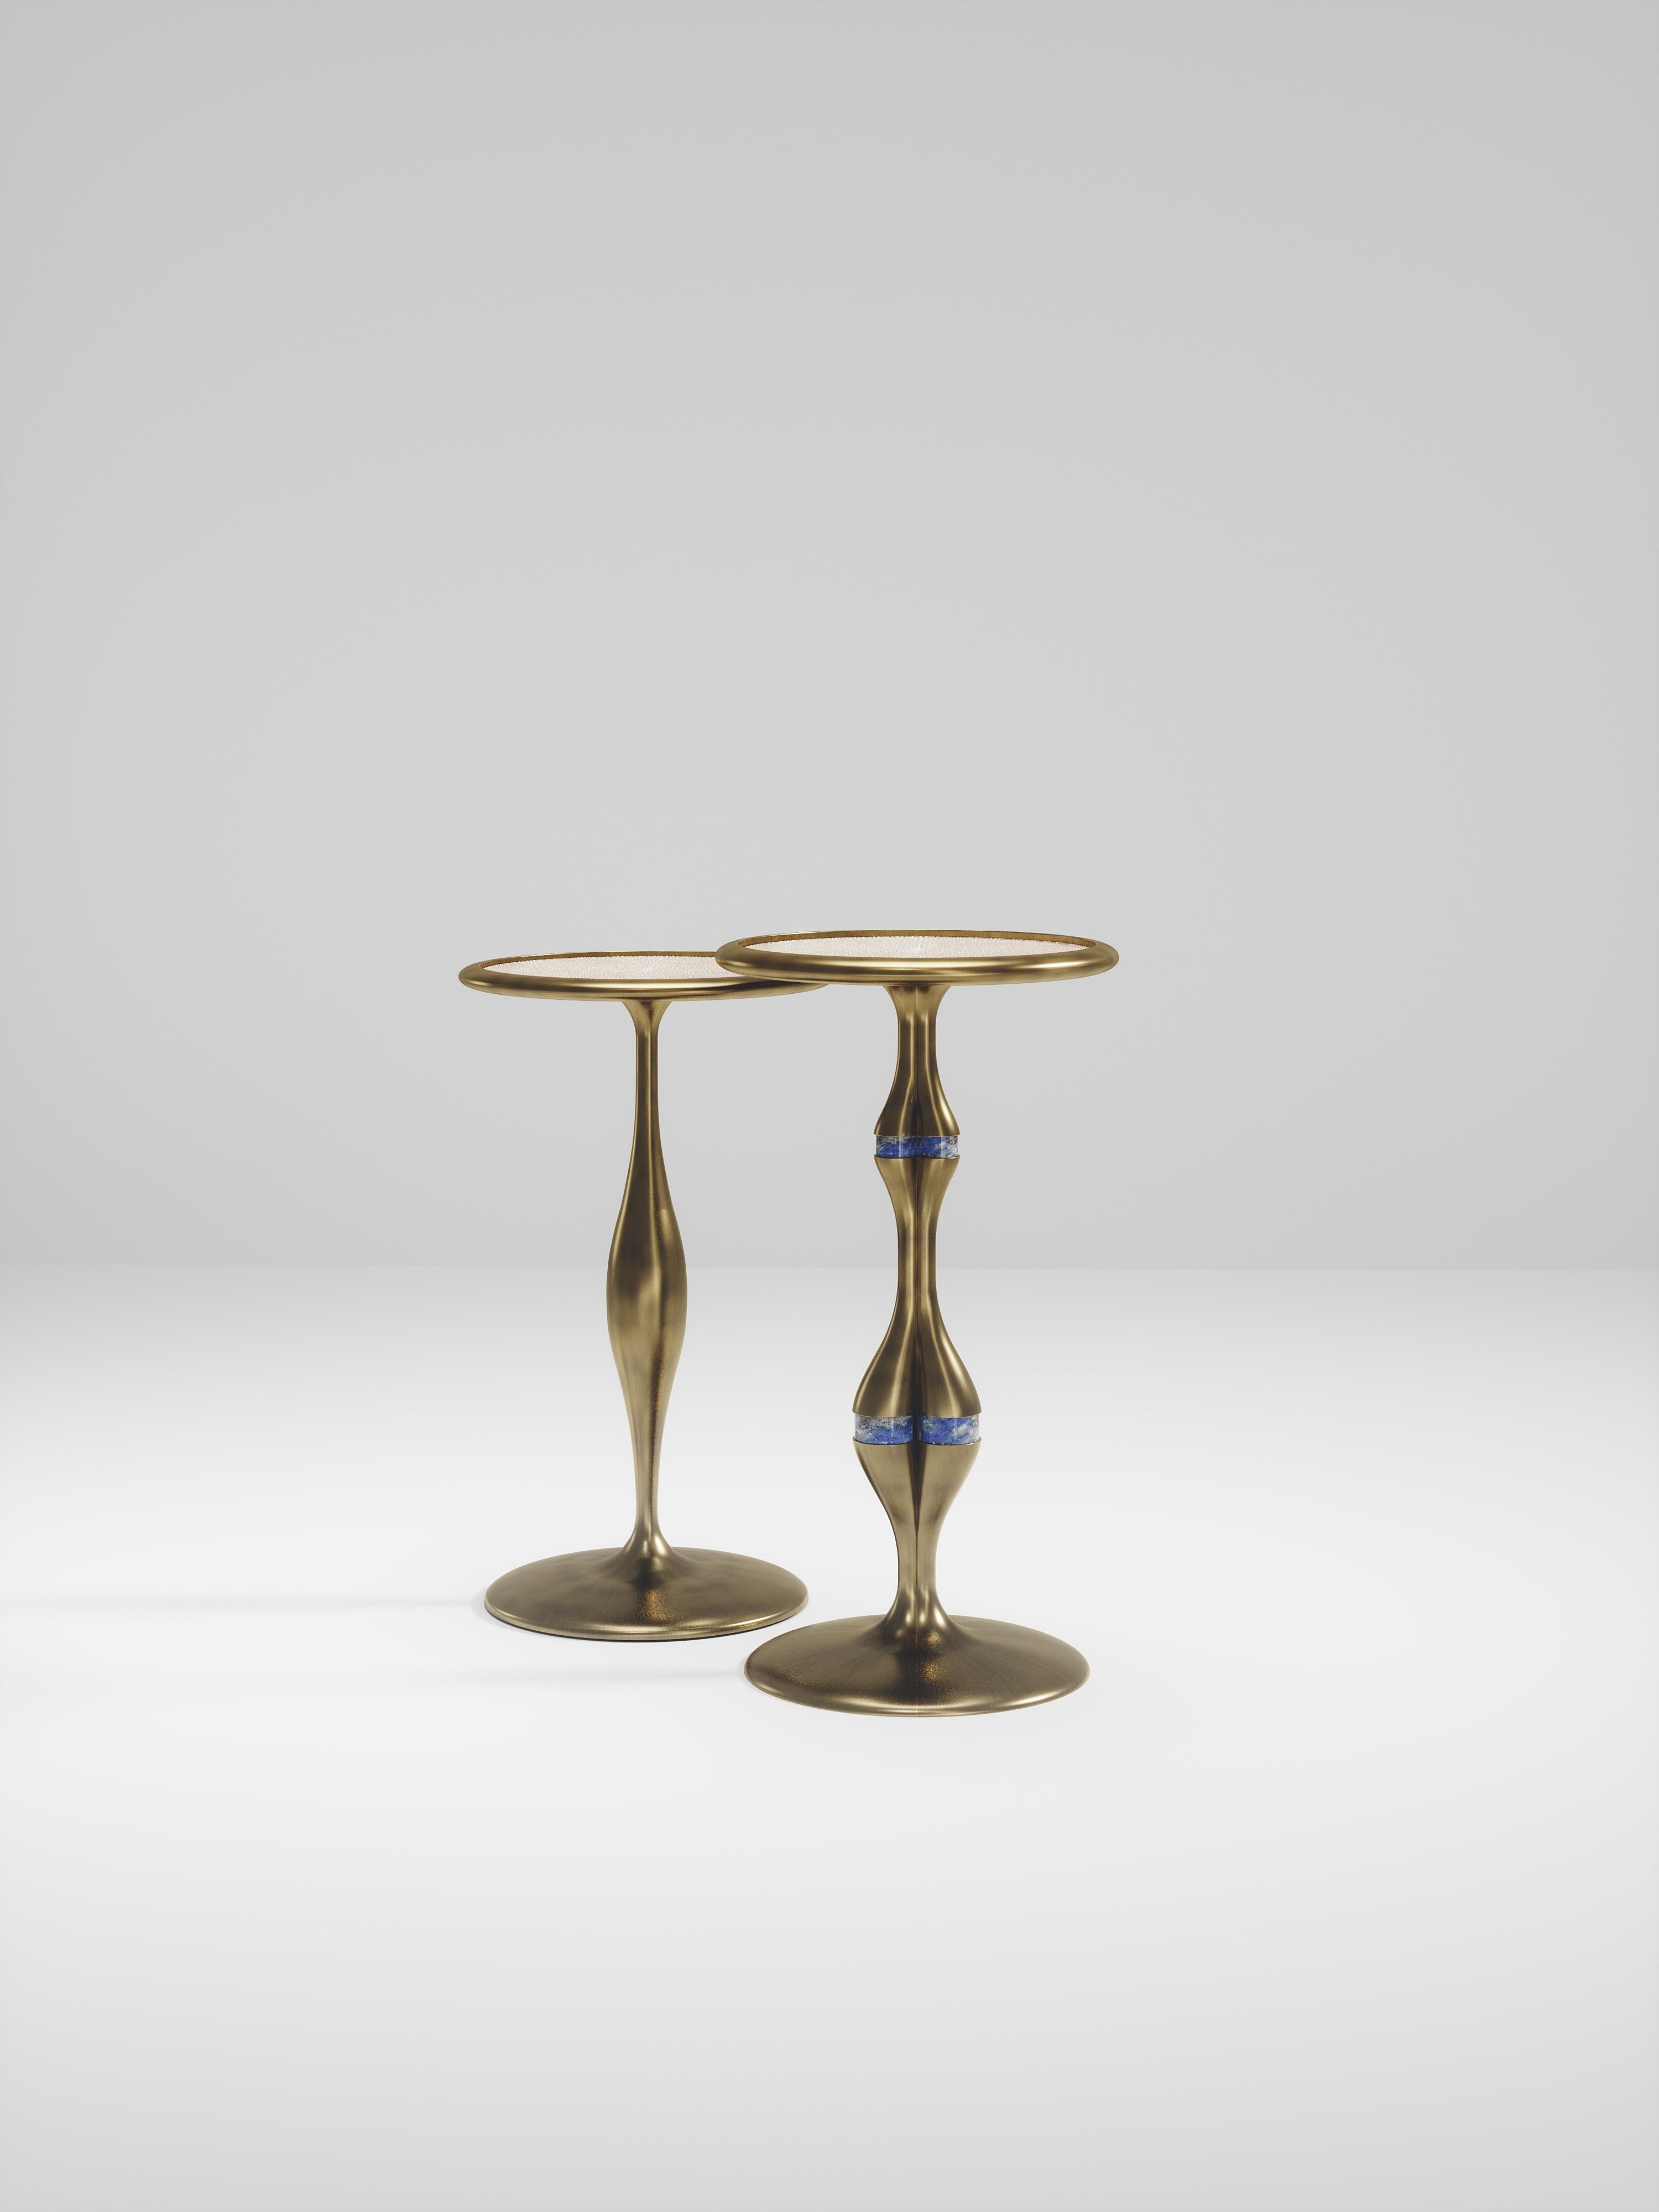 The Frequency Nesting side tables by R & Y Augousti are sleek with a vintage-modern feel. The piece explores fluid organic lines with subtle detailing to create the signature Augousti aesthetic. The piece is inlaid in a mixture of cream shagreen and